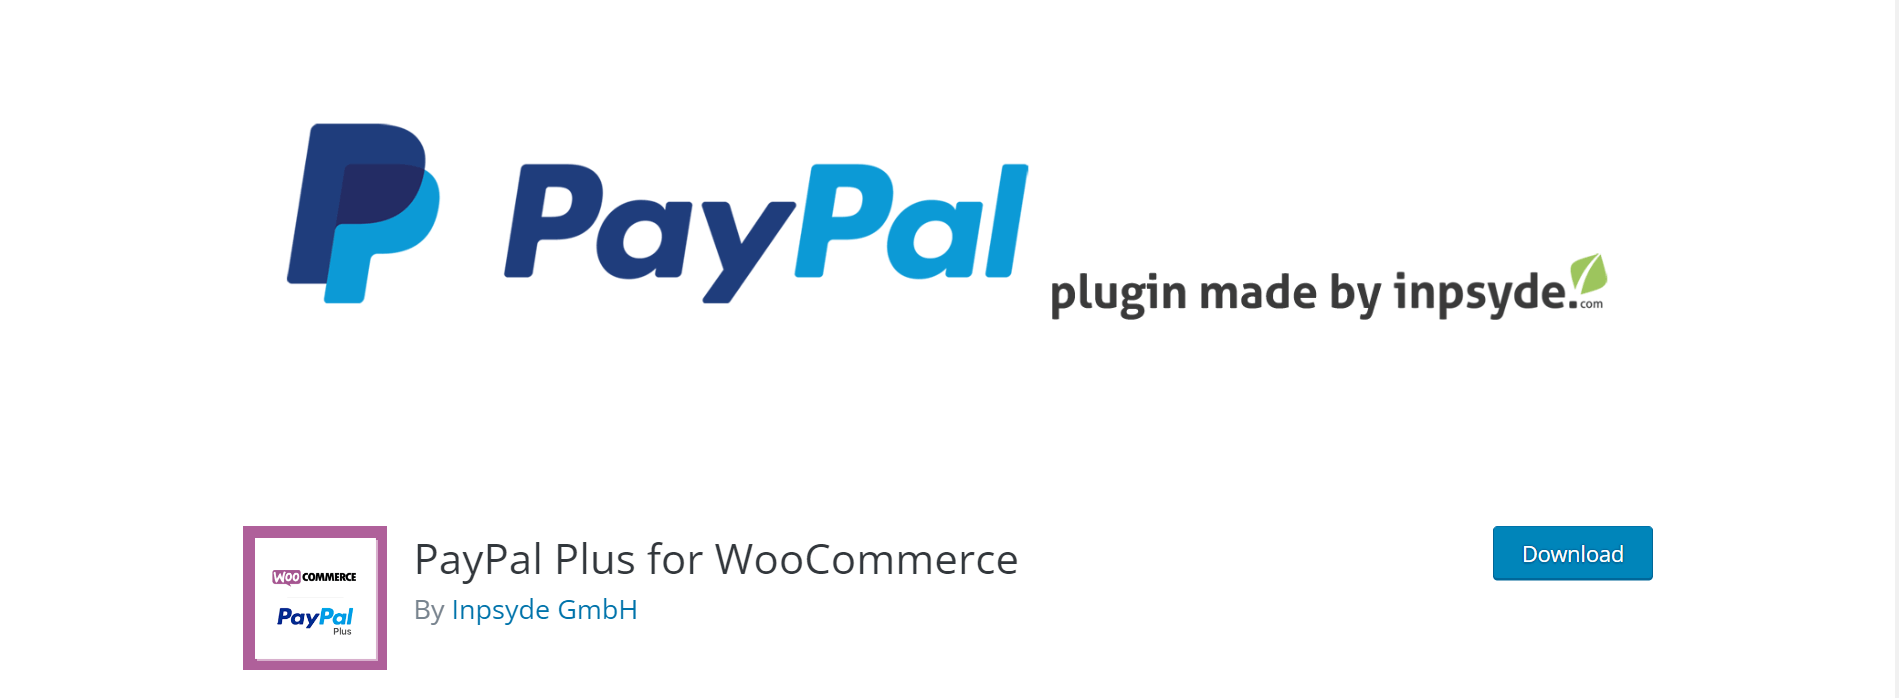 PayPal Plus for WooCommerce